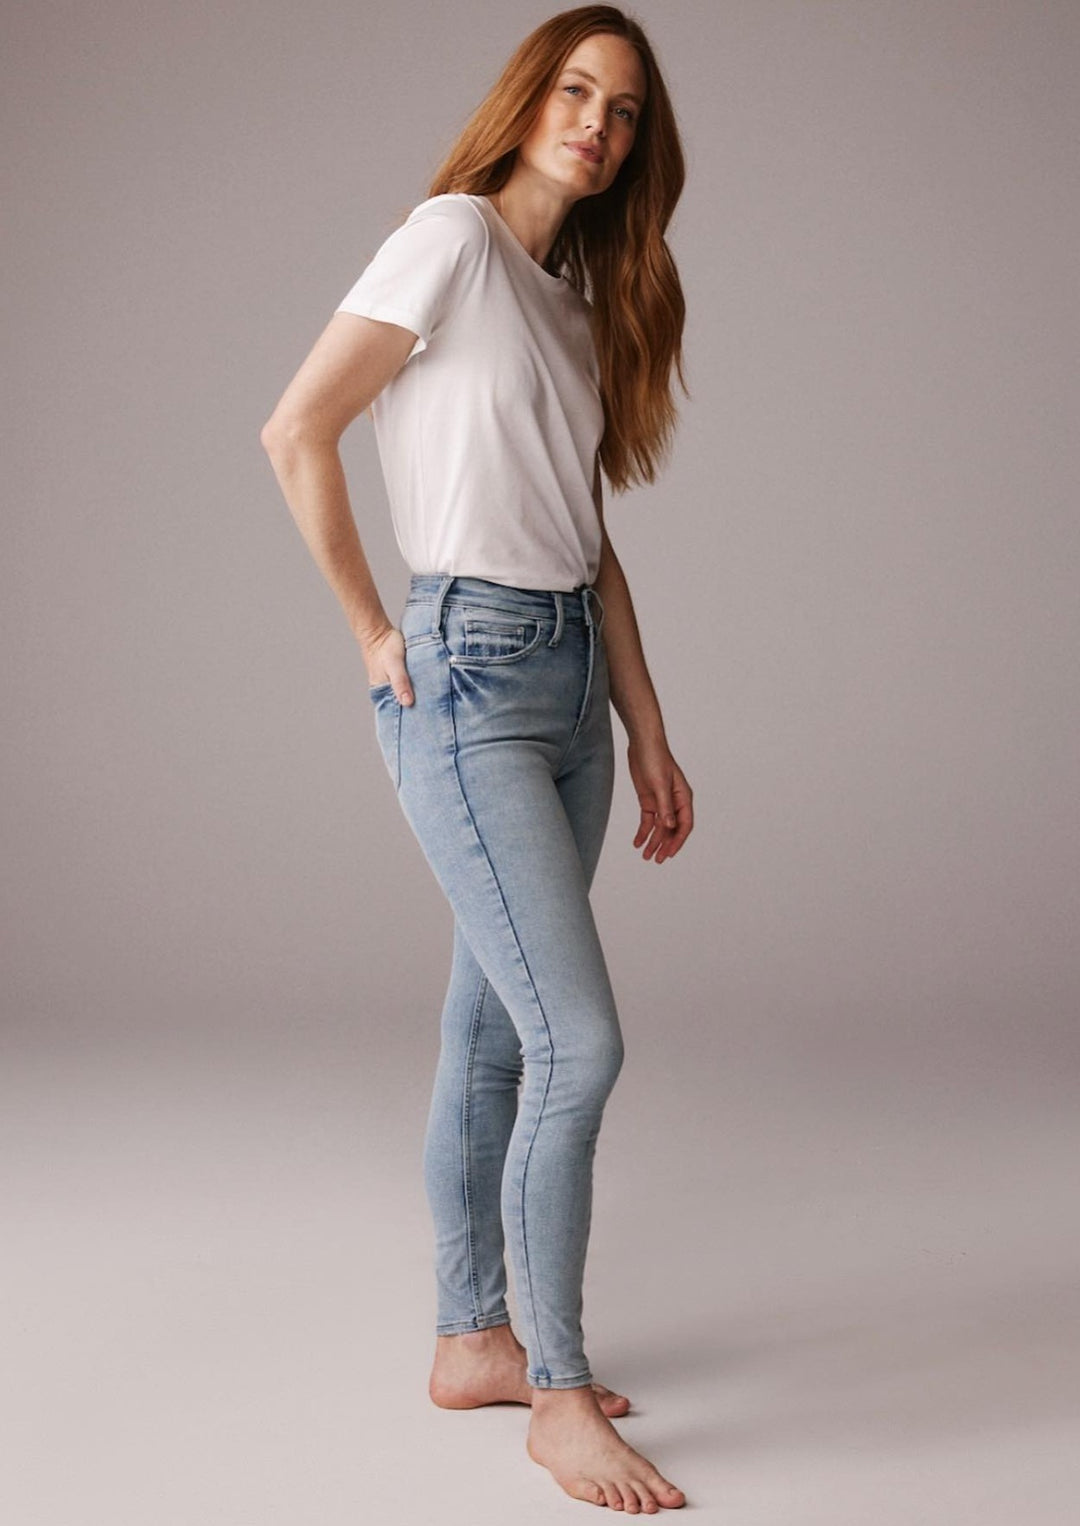 Buy Infinite Fit High Rise Skinny Jeans for CAD 88.00